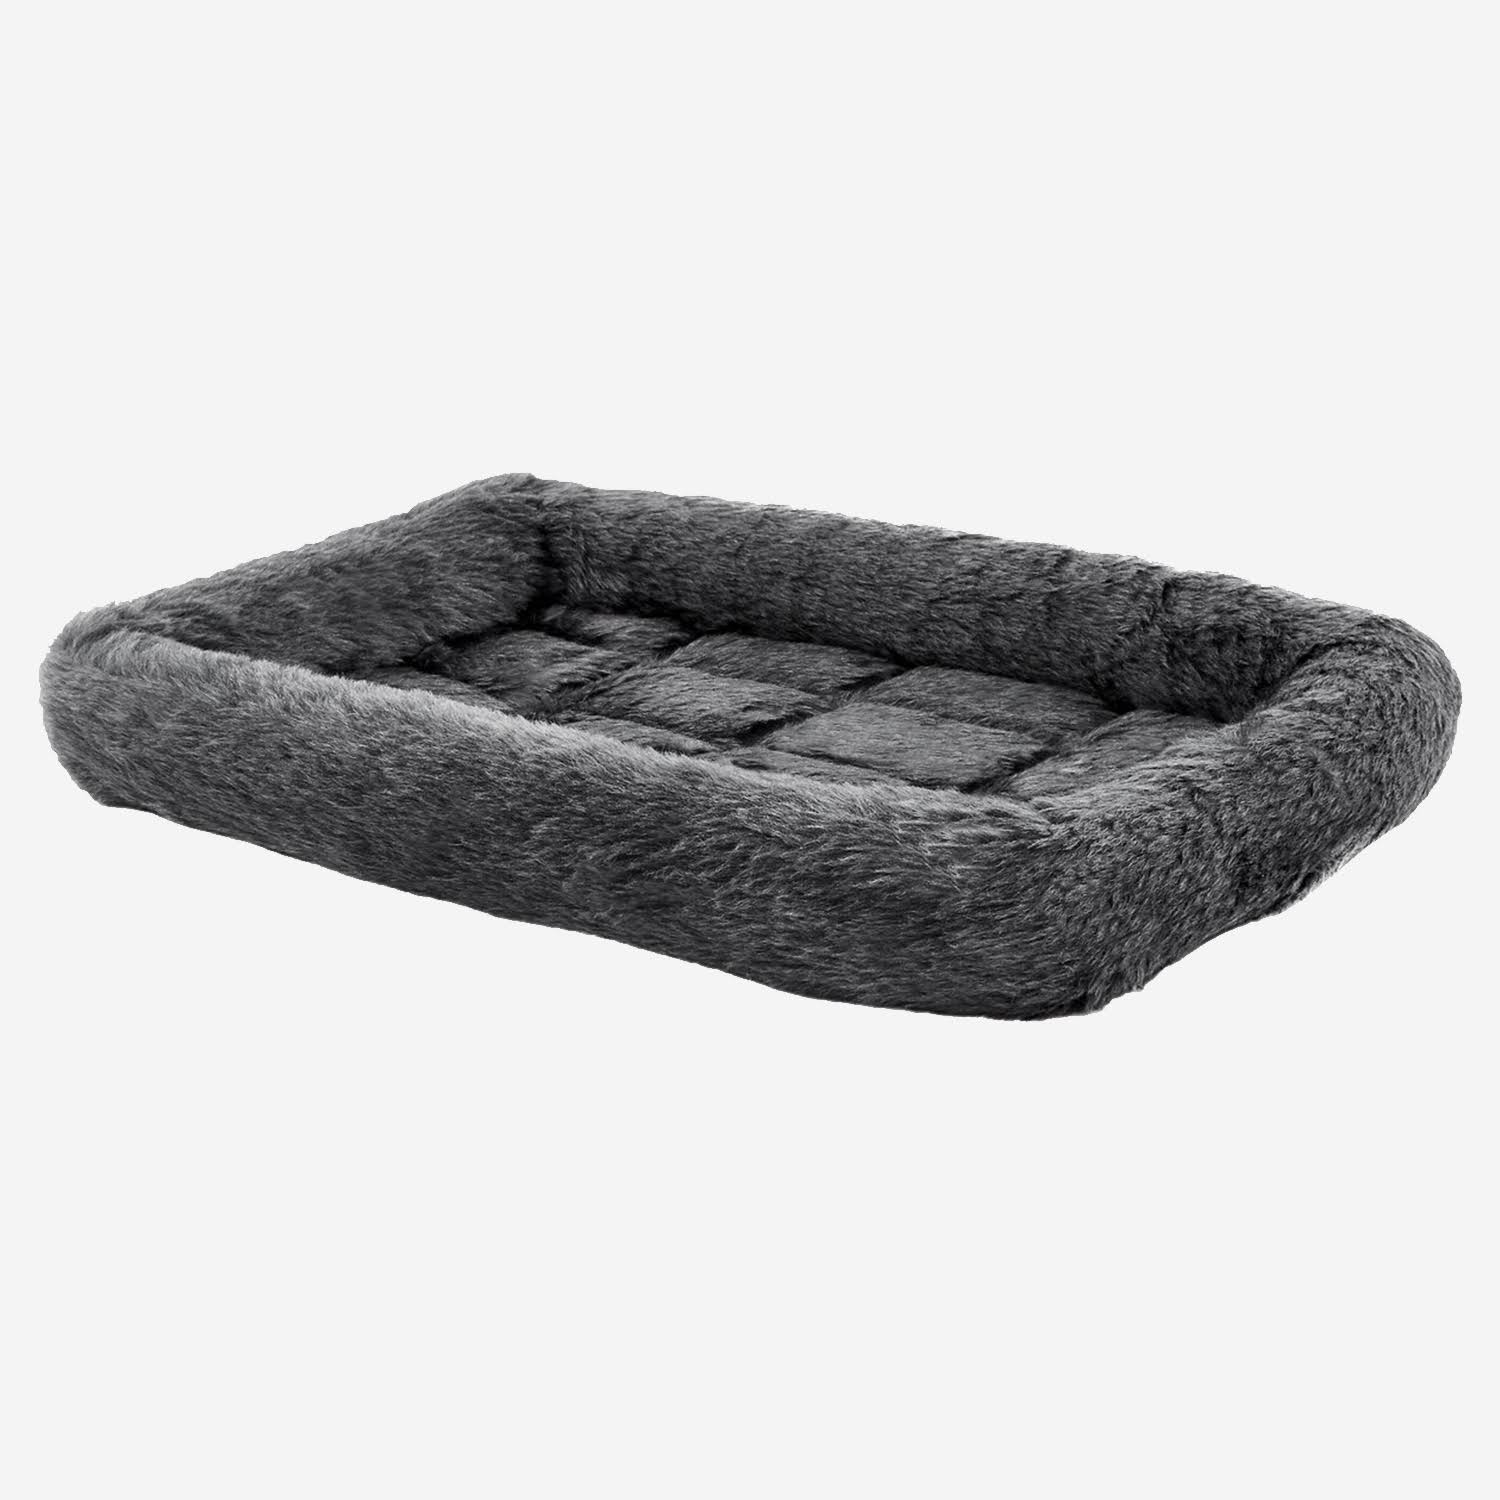 Midwest Quiet Time Fleece Crate Bed - 36x23"